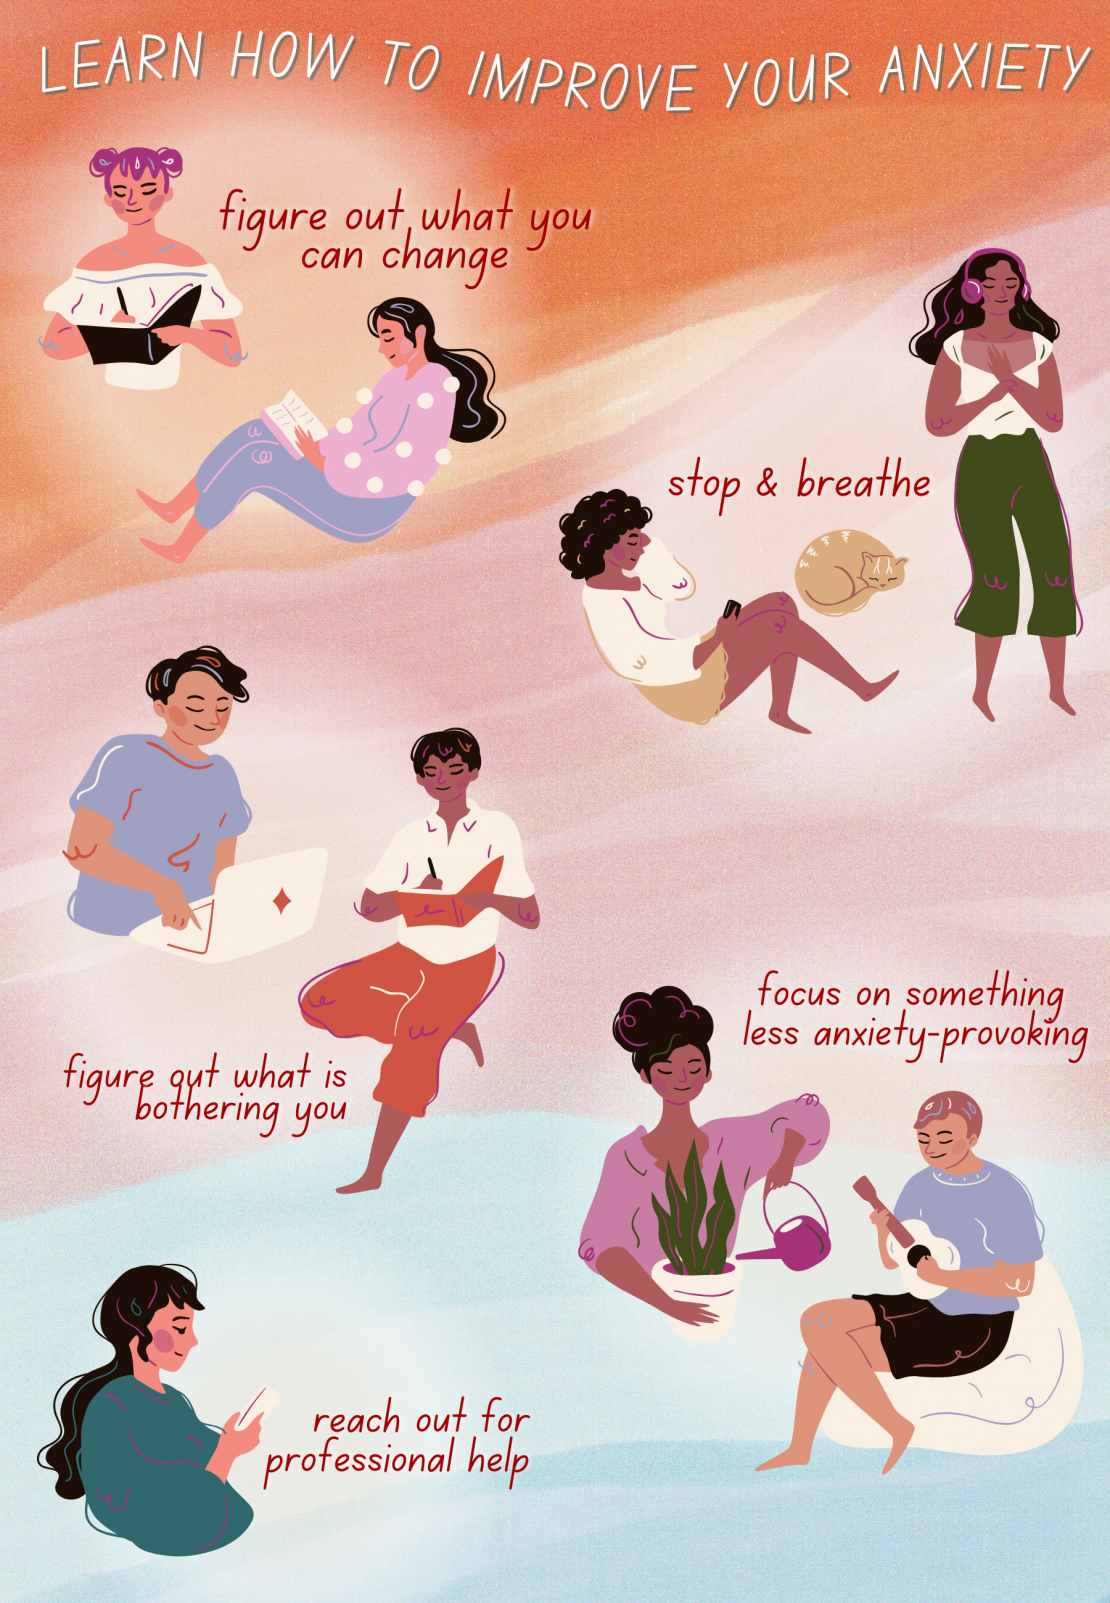 Anxiety tips